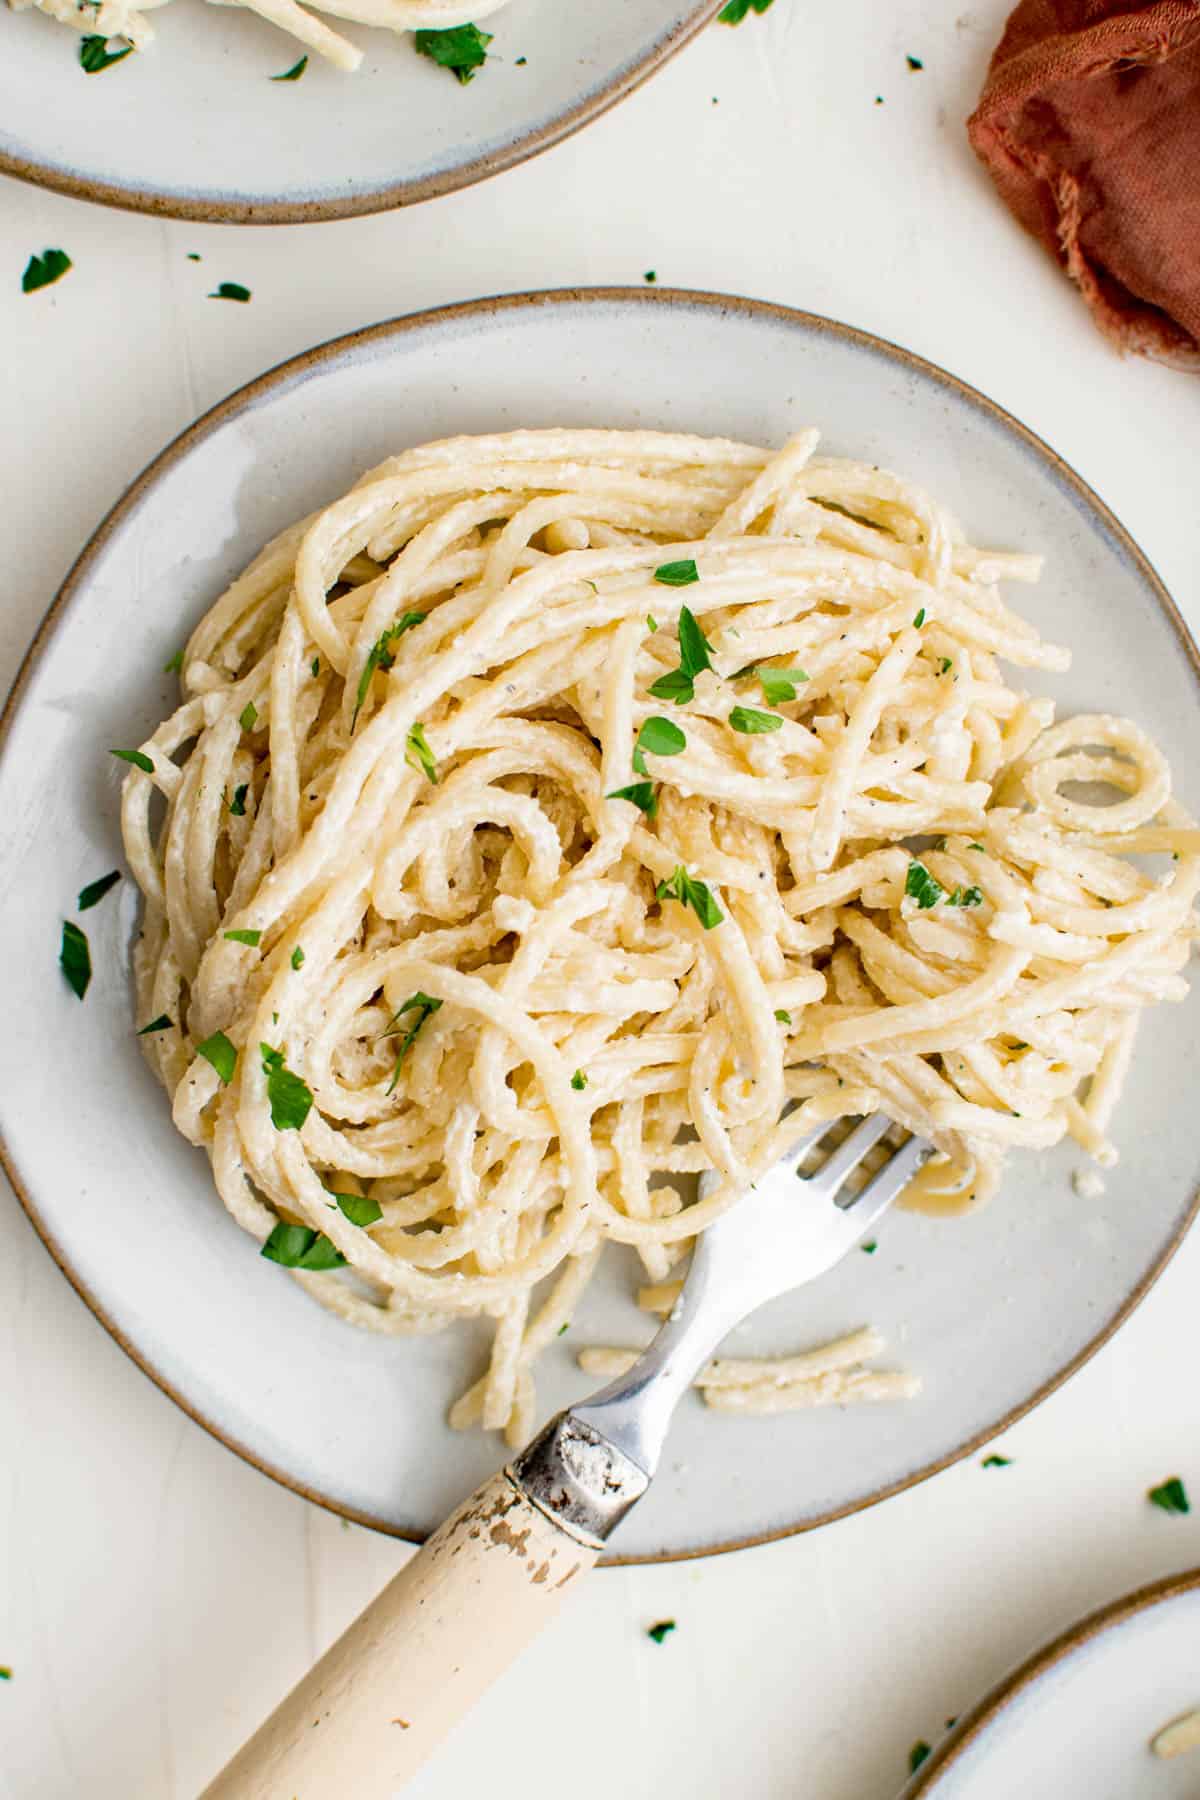 A plate of cream cheese pasta topped with parsley, and a silver fork